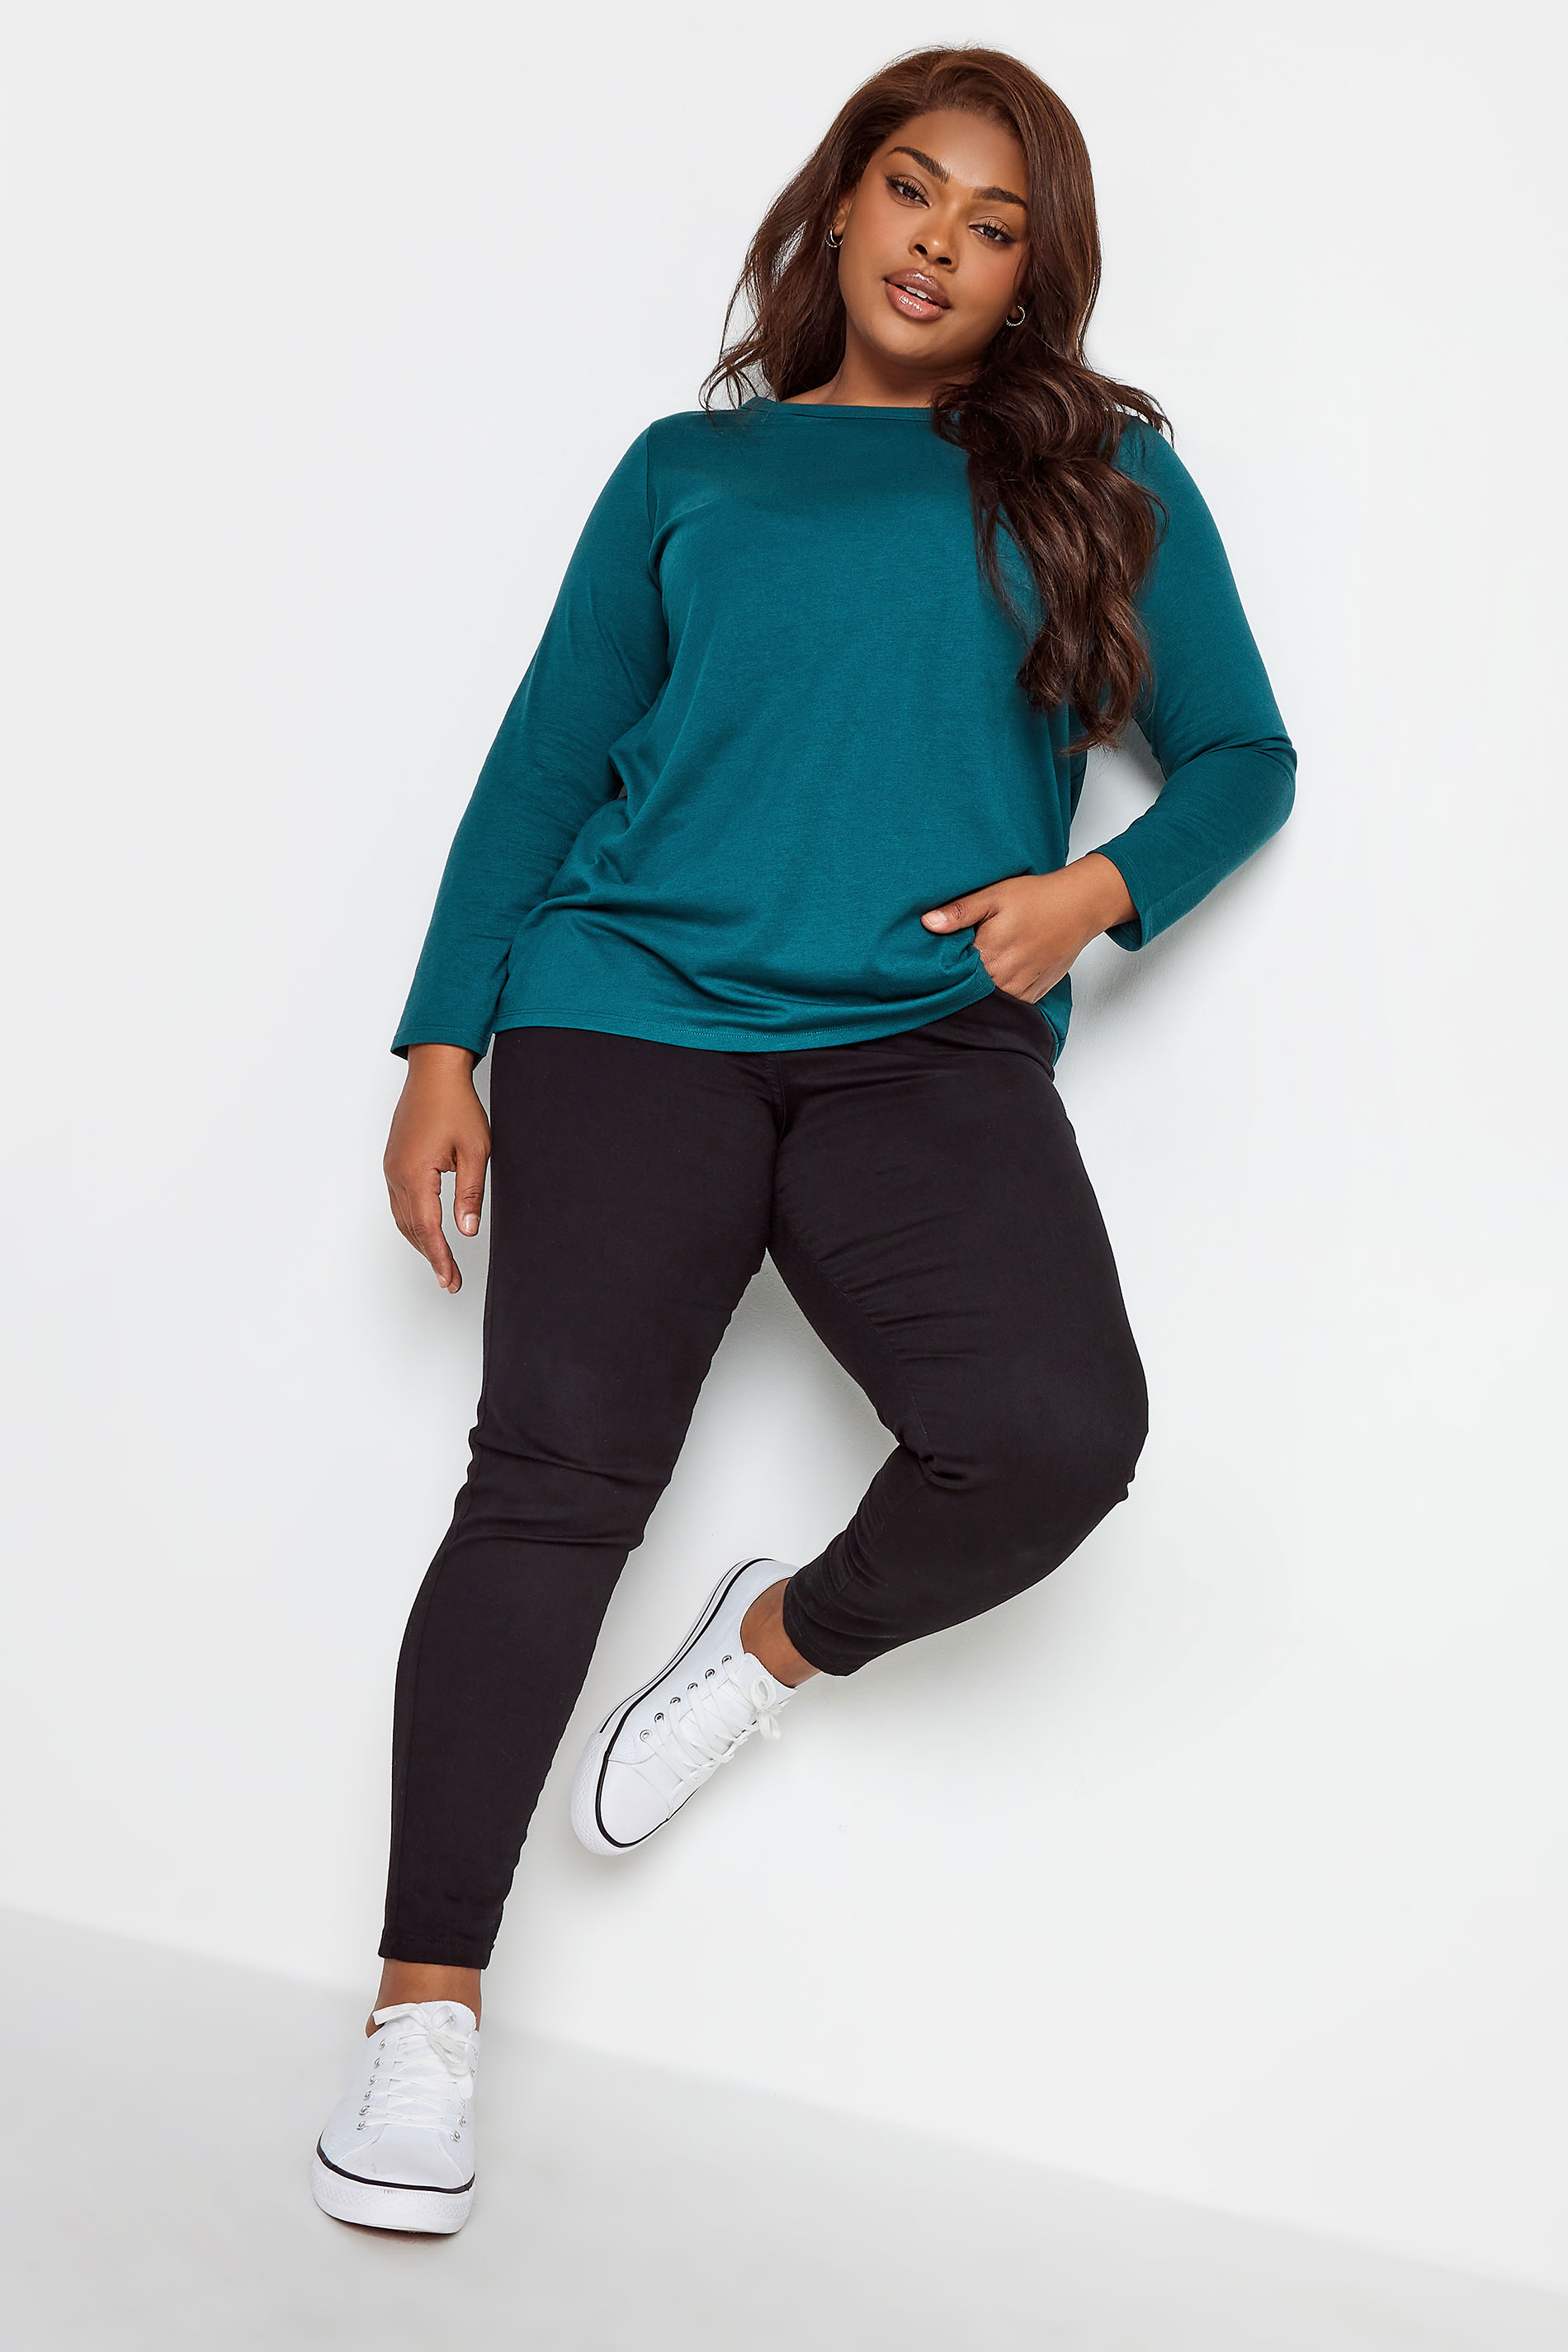 YOURS Curve Plus Size Teal Blue Long Sleeve Basic Top | Yours Clothing  2